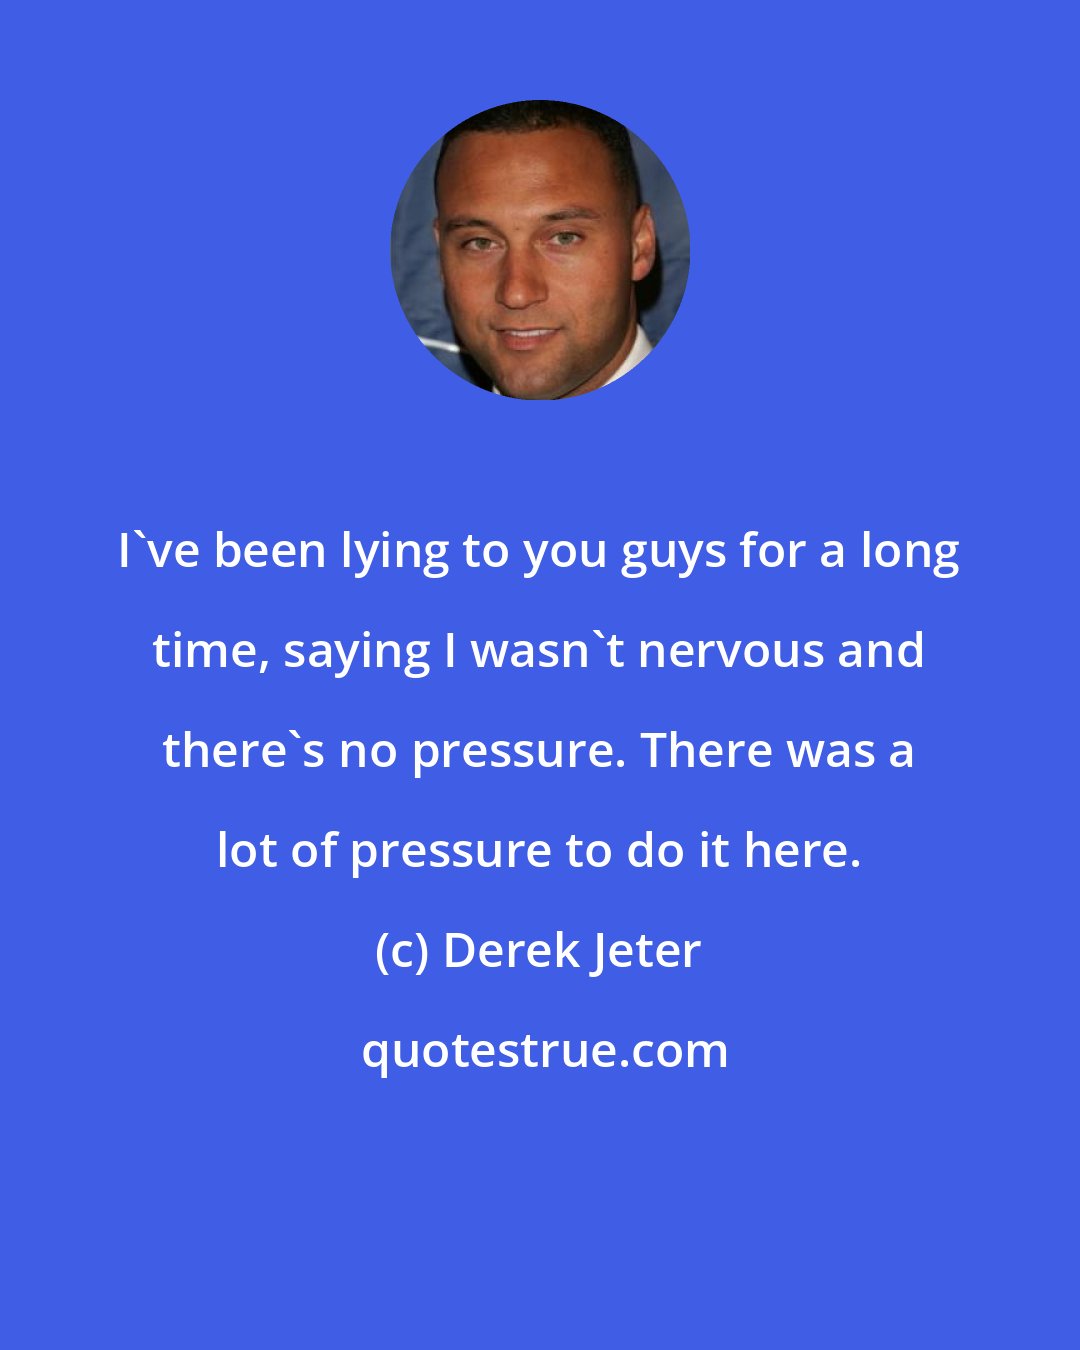 Derek Jeter: I've been lying to you guys for a long time, saying I wasn't nervous and there's no pressure. There was a lot of pressure to do it here.